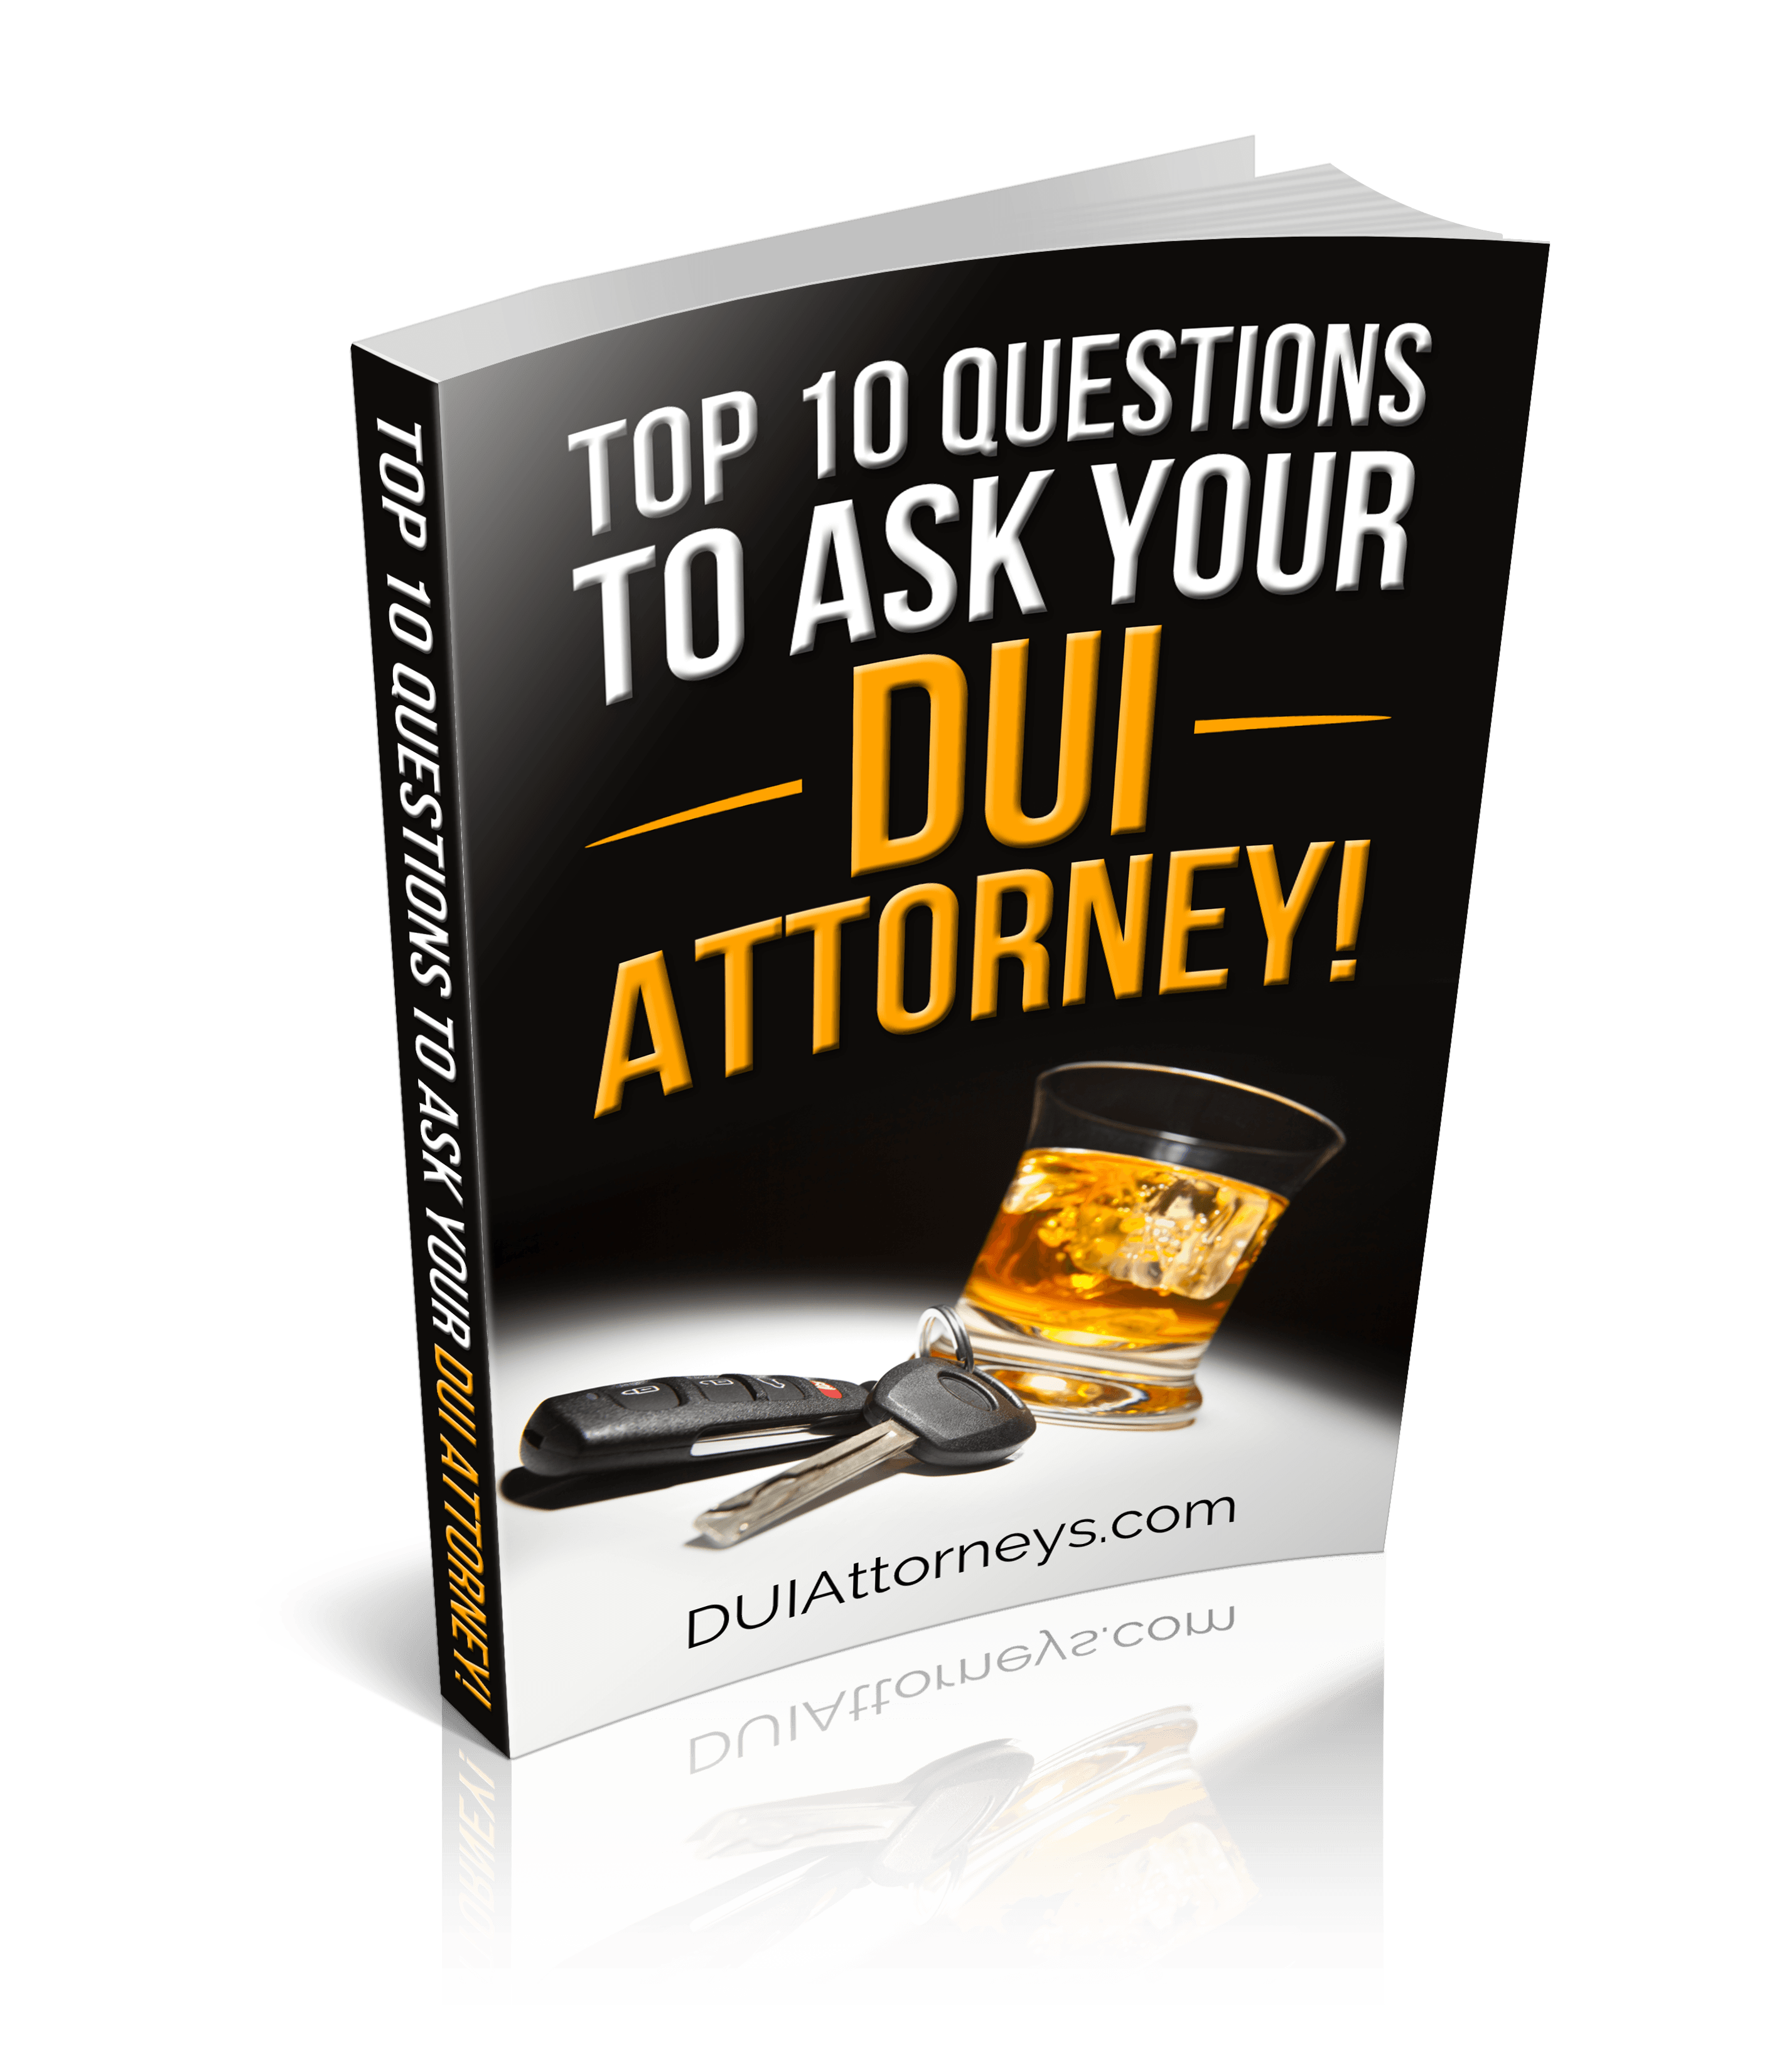 Top 10 Questions to Ask your DUI Attorney